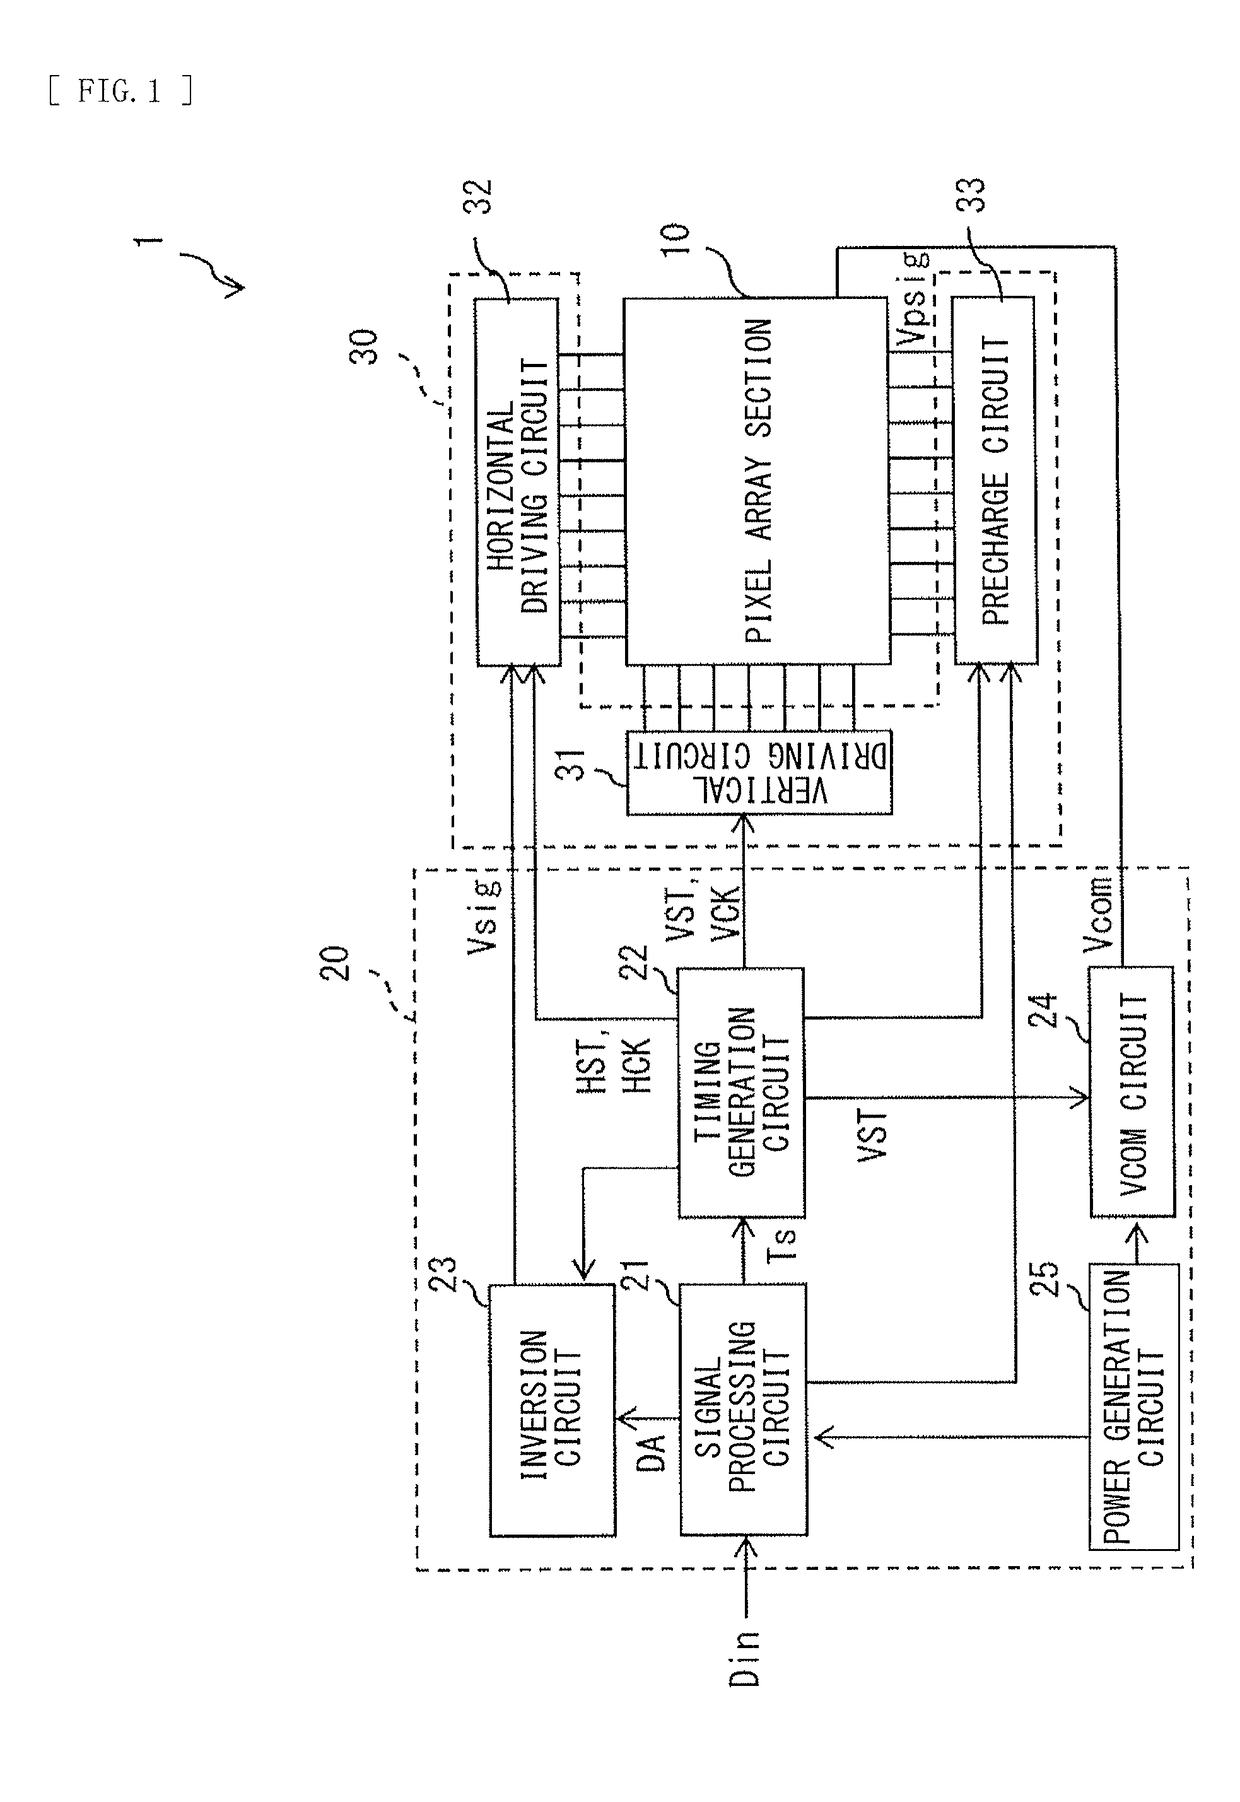 Display device, electronic apparatus, and projection display apparatus